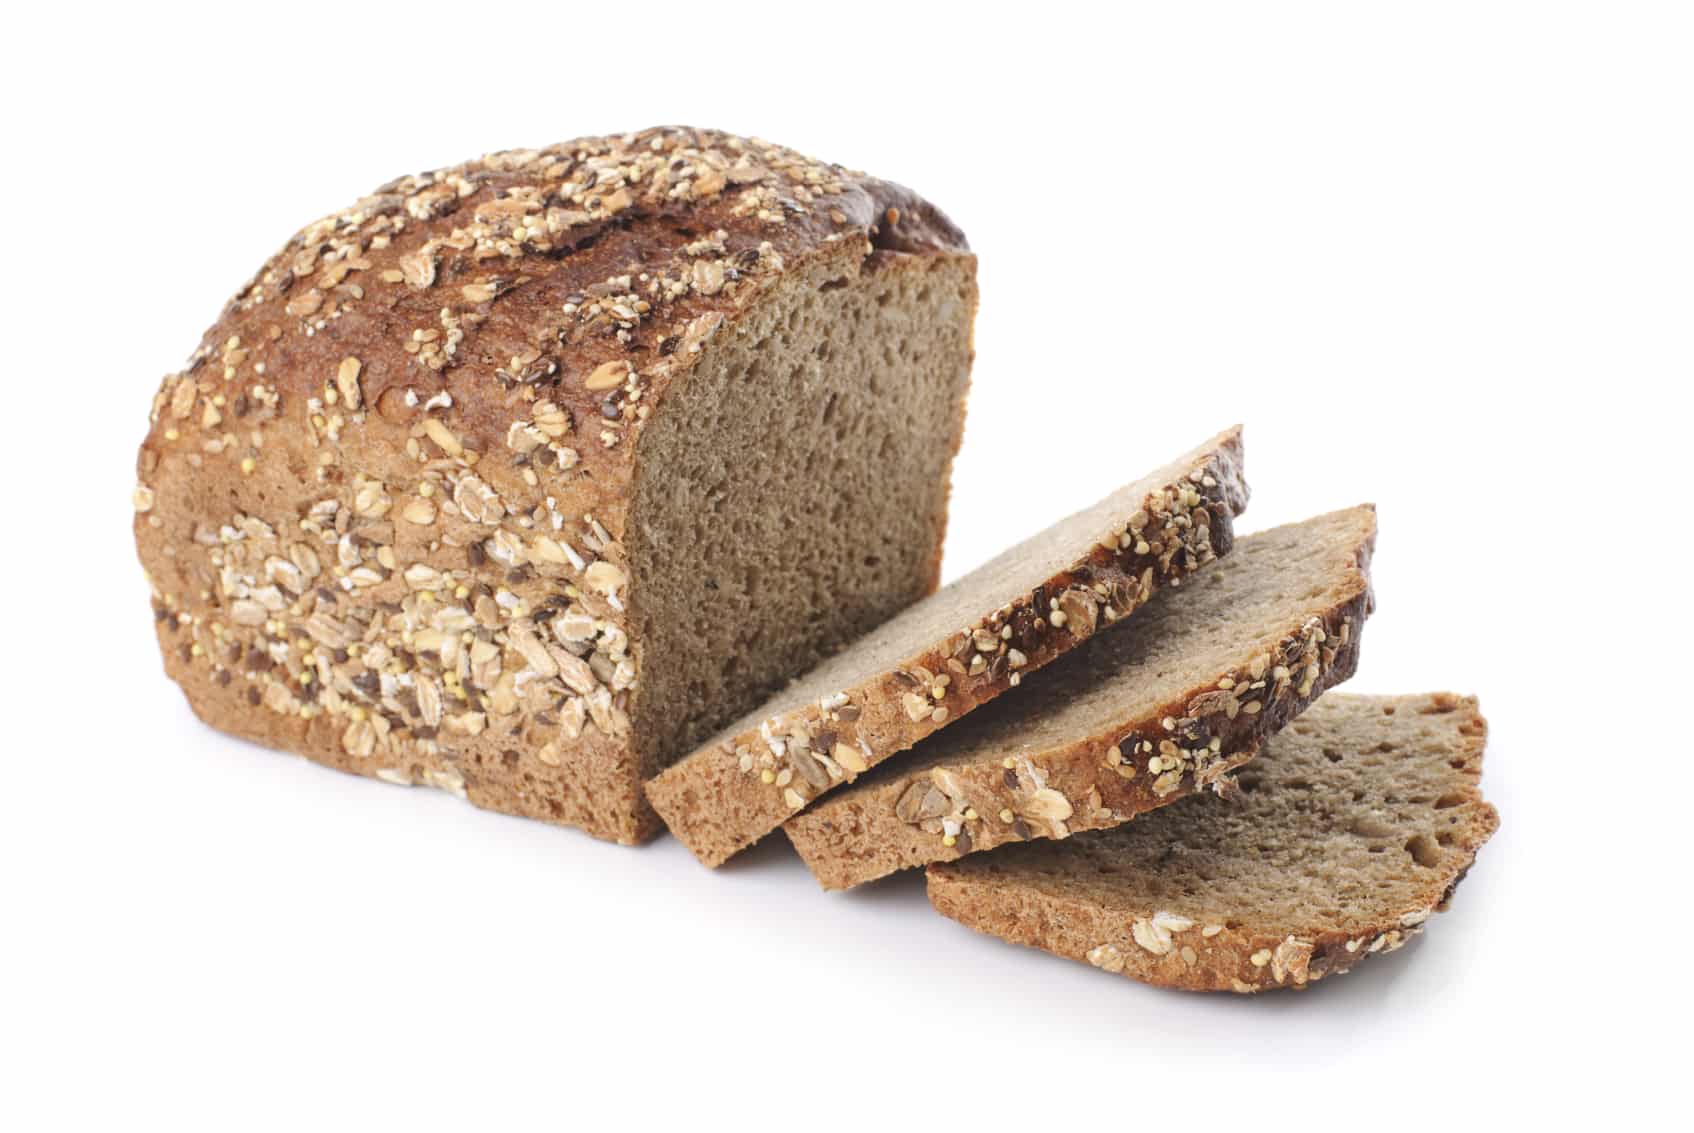 Whole Wheat Bread is a way to eat less processed junk and stick with whole foods, which help ease anxiety.